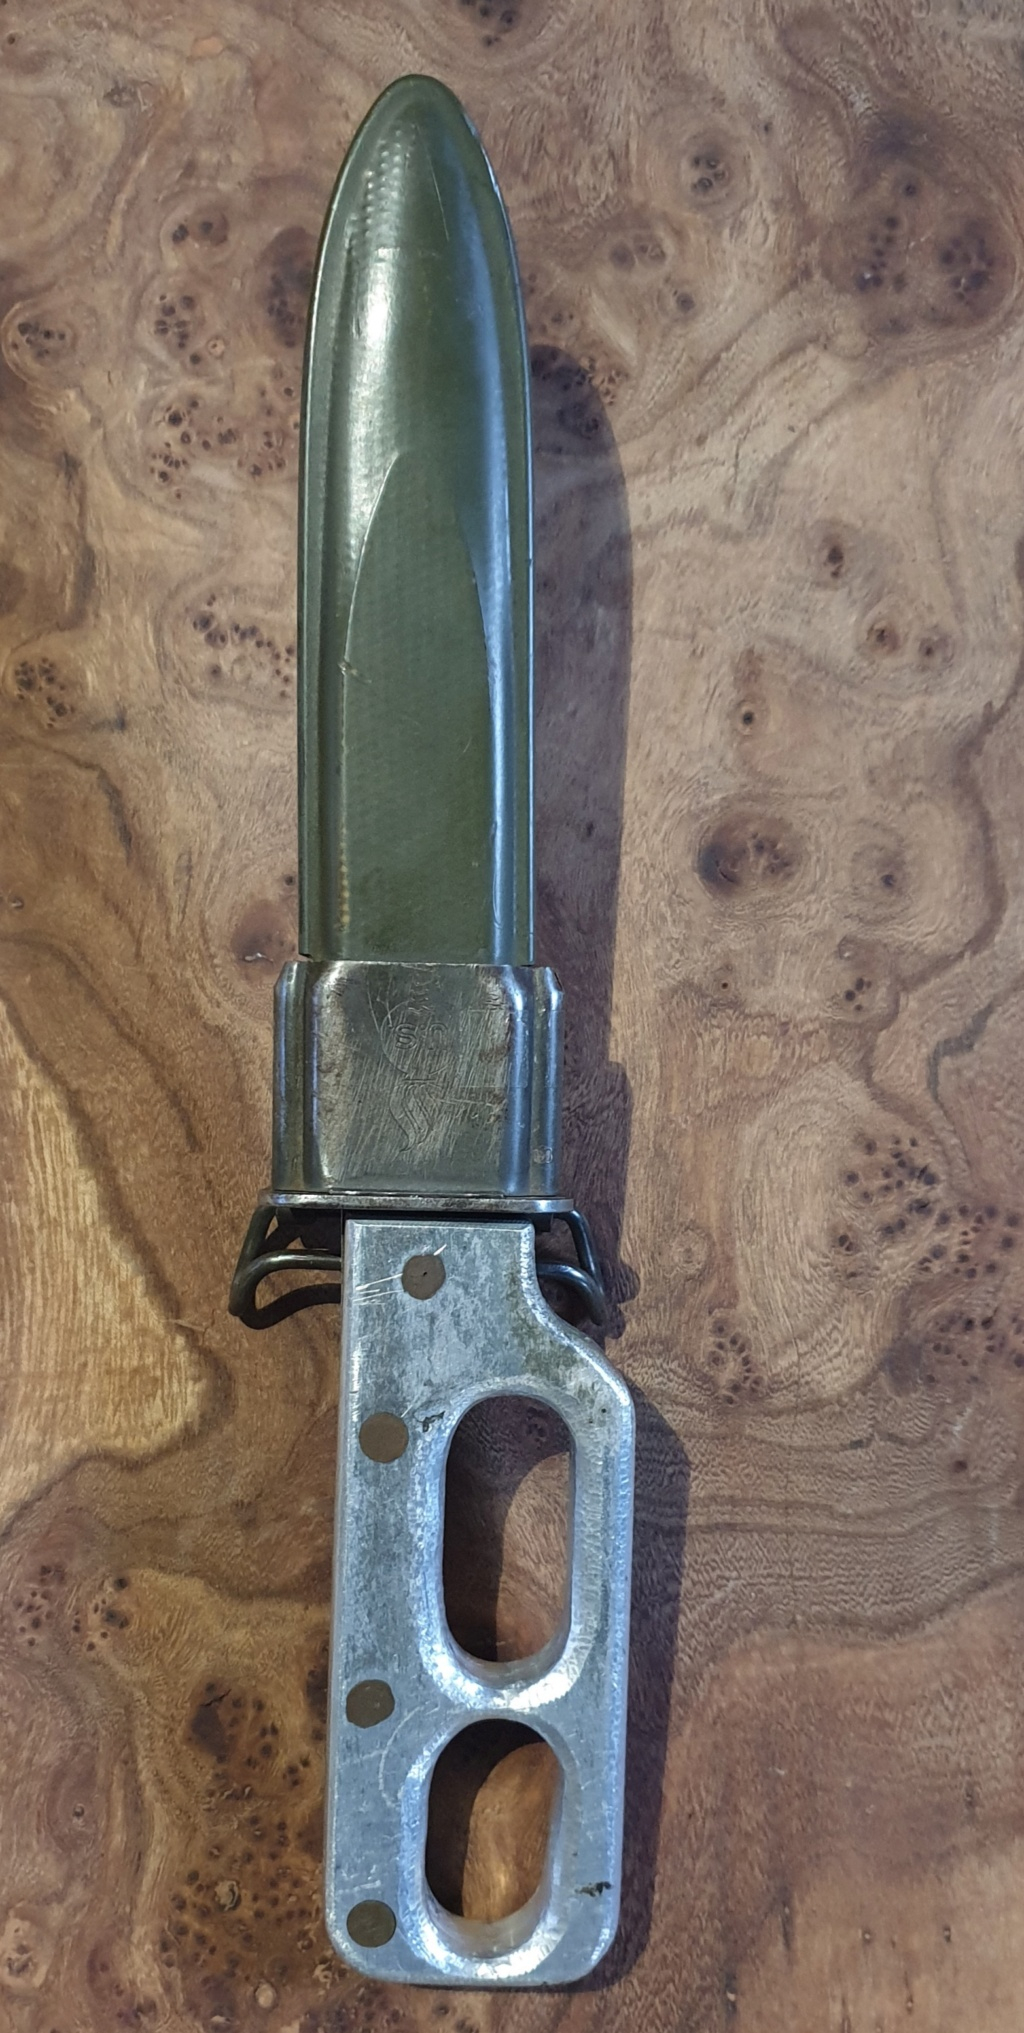 Trench knife "theater made" 20240141